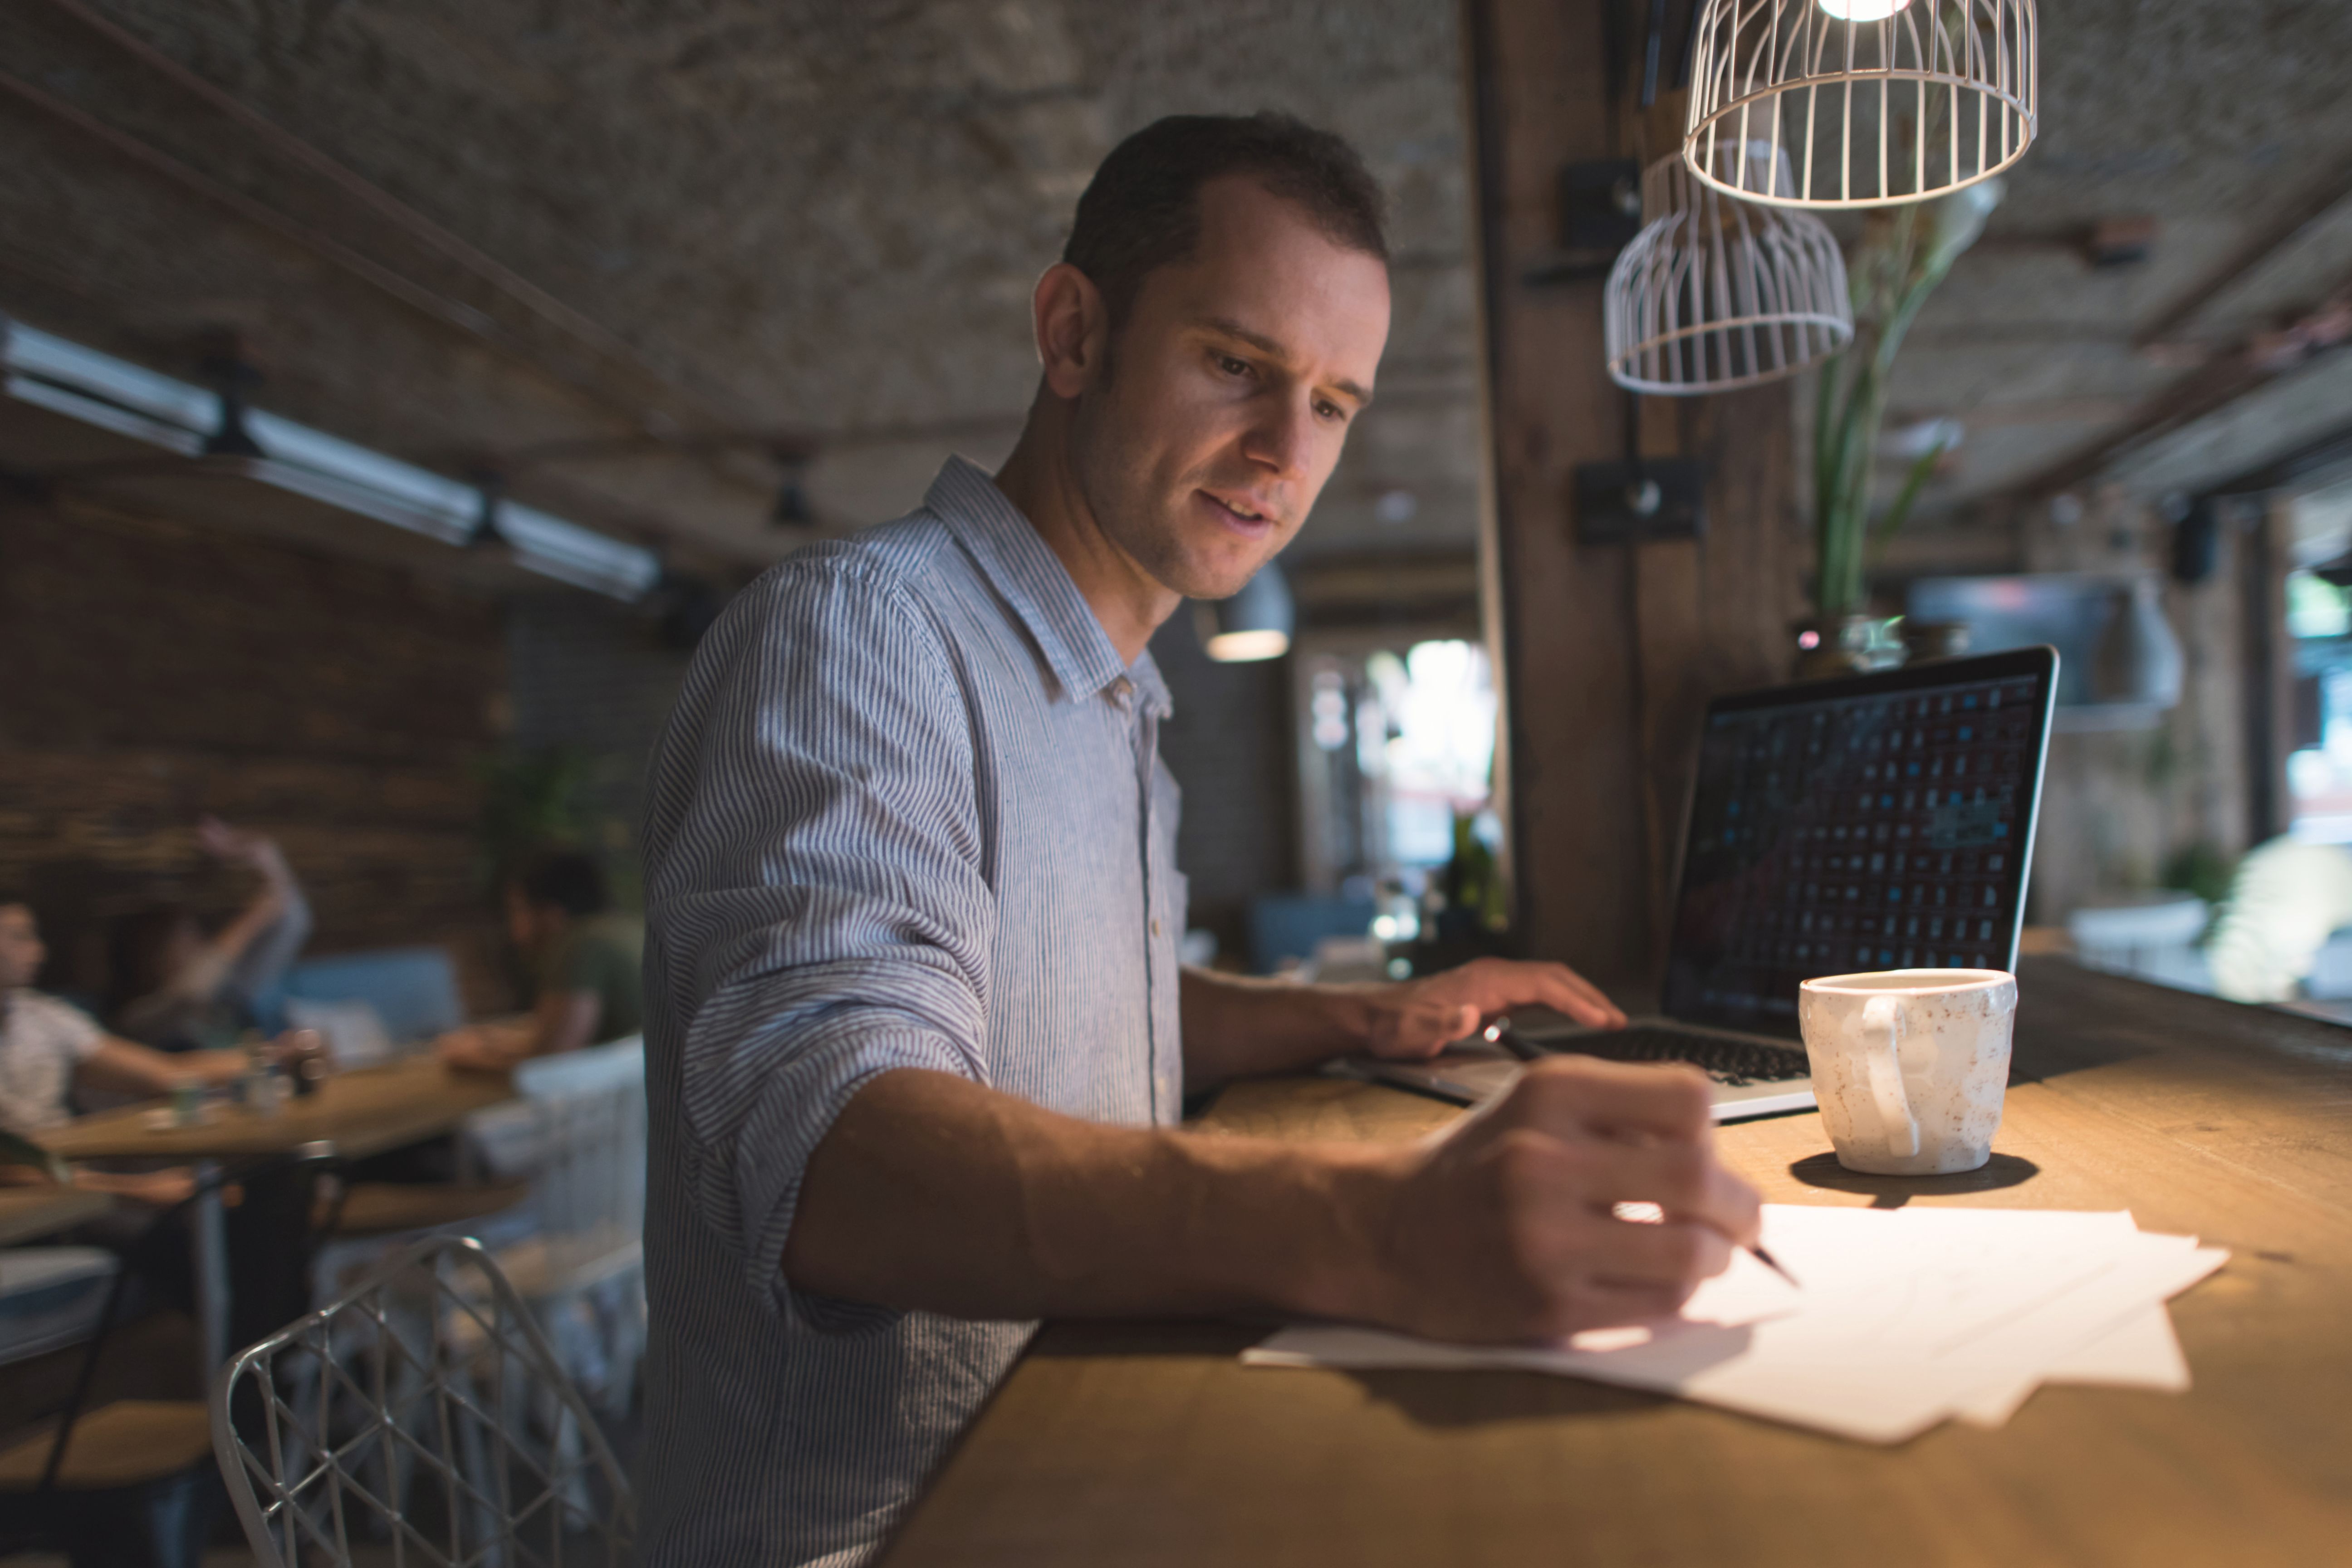 The right pricing strategies can help you grow your restaurant business.